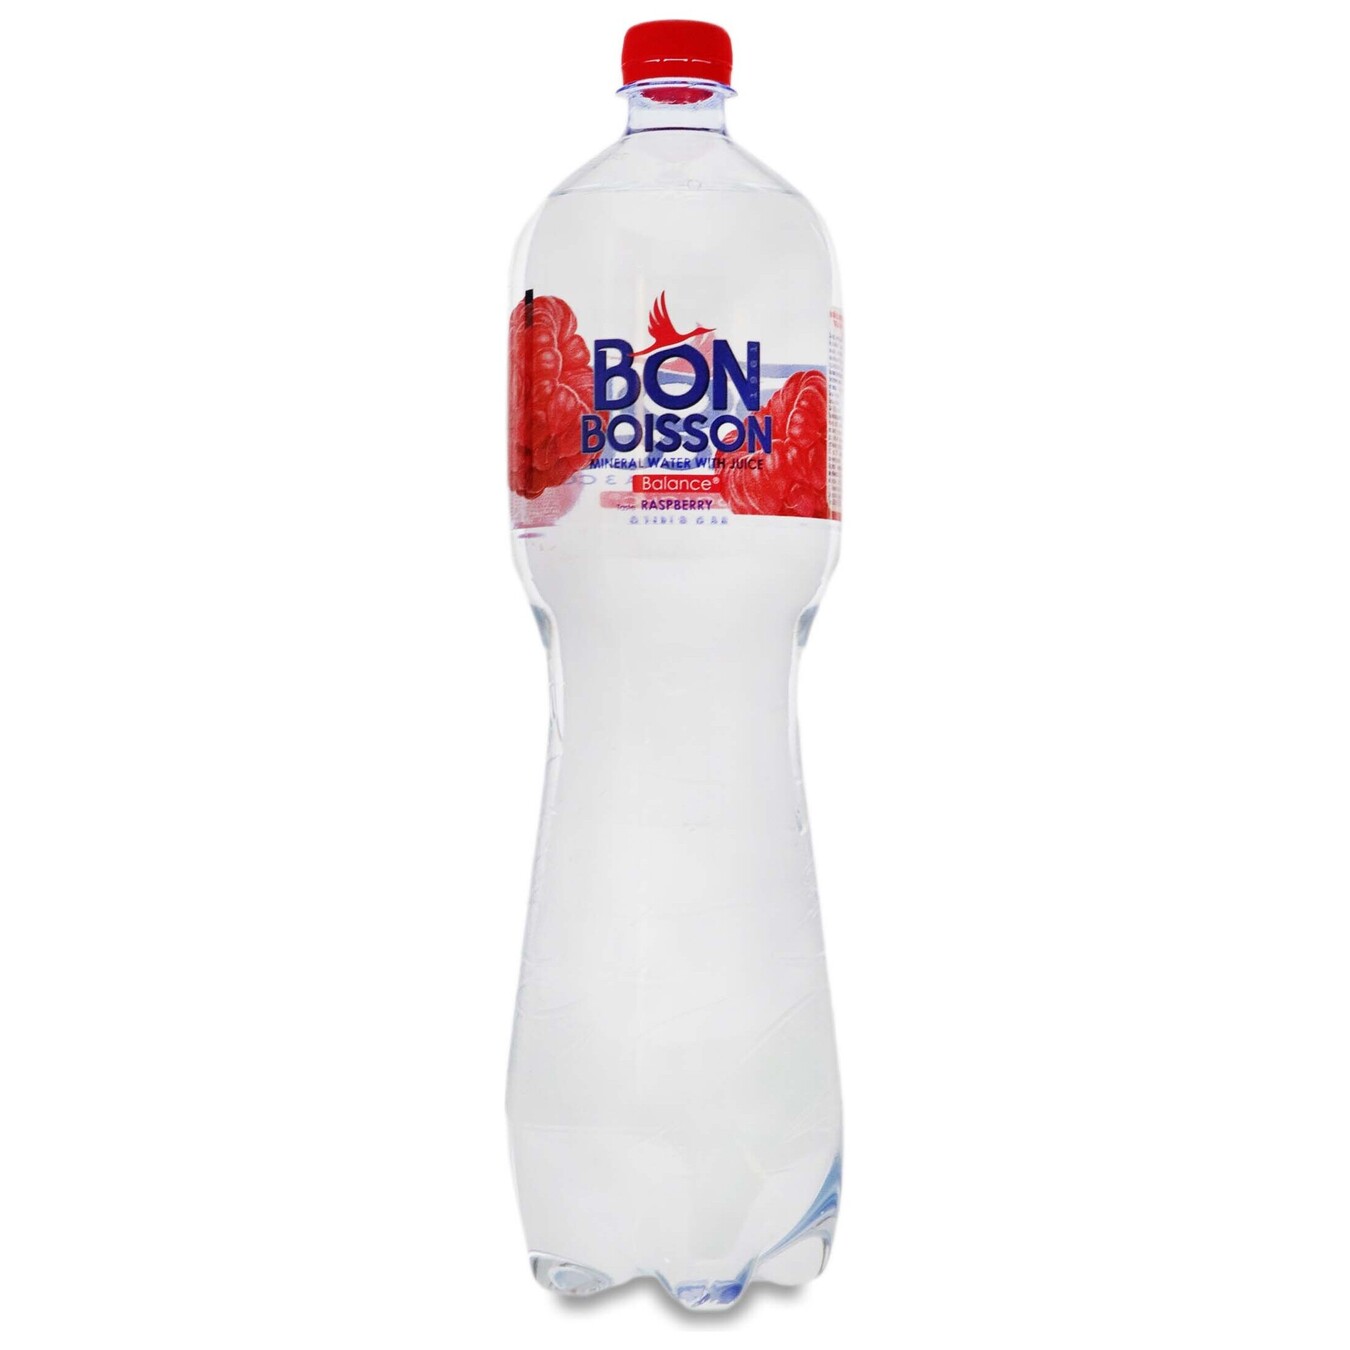 Bon Boisson strongly carbonated mineral water with raspberry juice 1.5 l